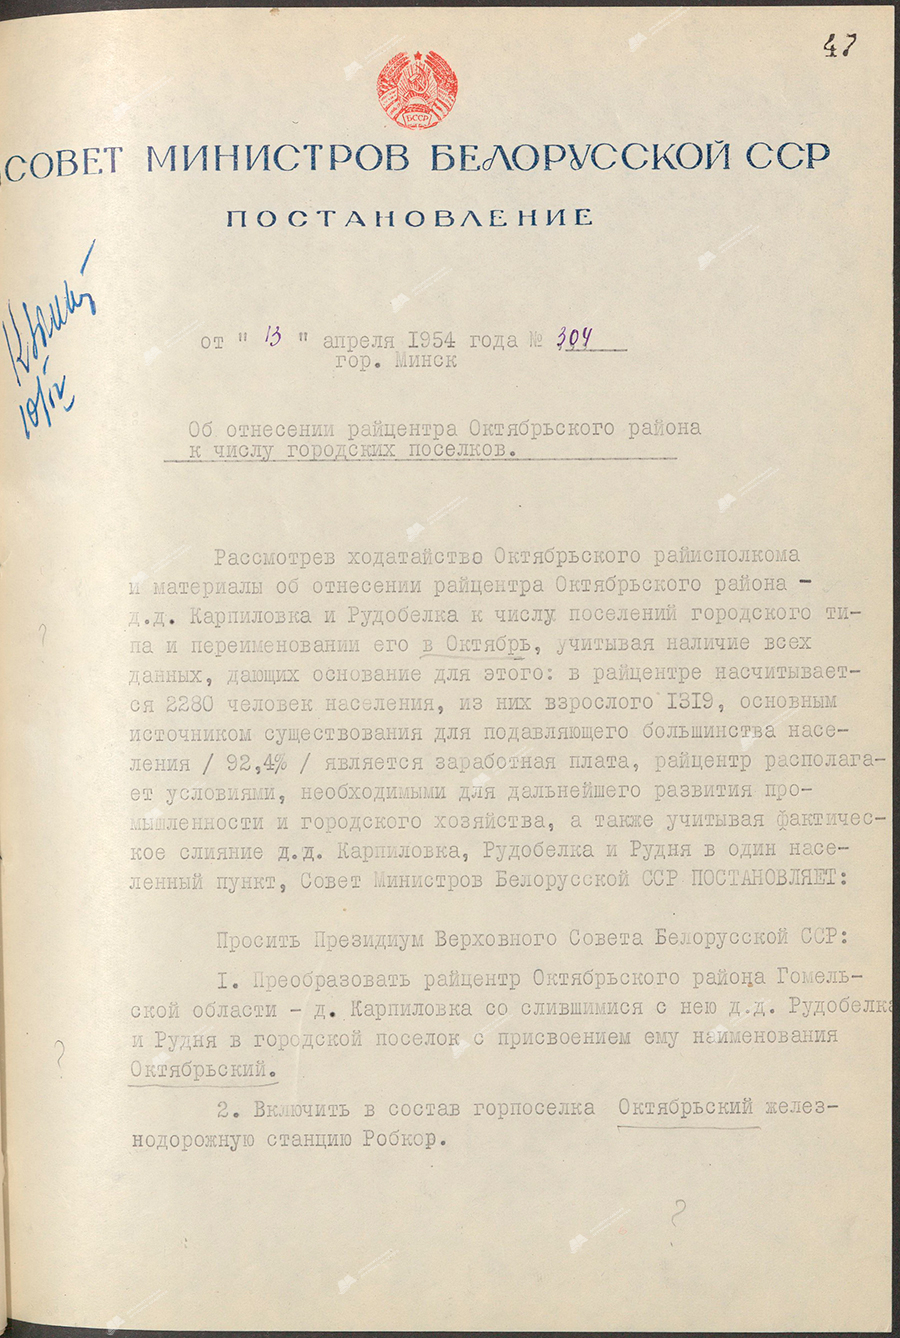 Resolution No. 304 of the Council of Ministers of the Byelorussian SSR «On classifying the regional center of the Oktyabrsky district as an urban settlement»-стр. 0